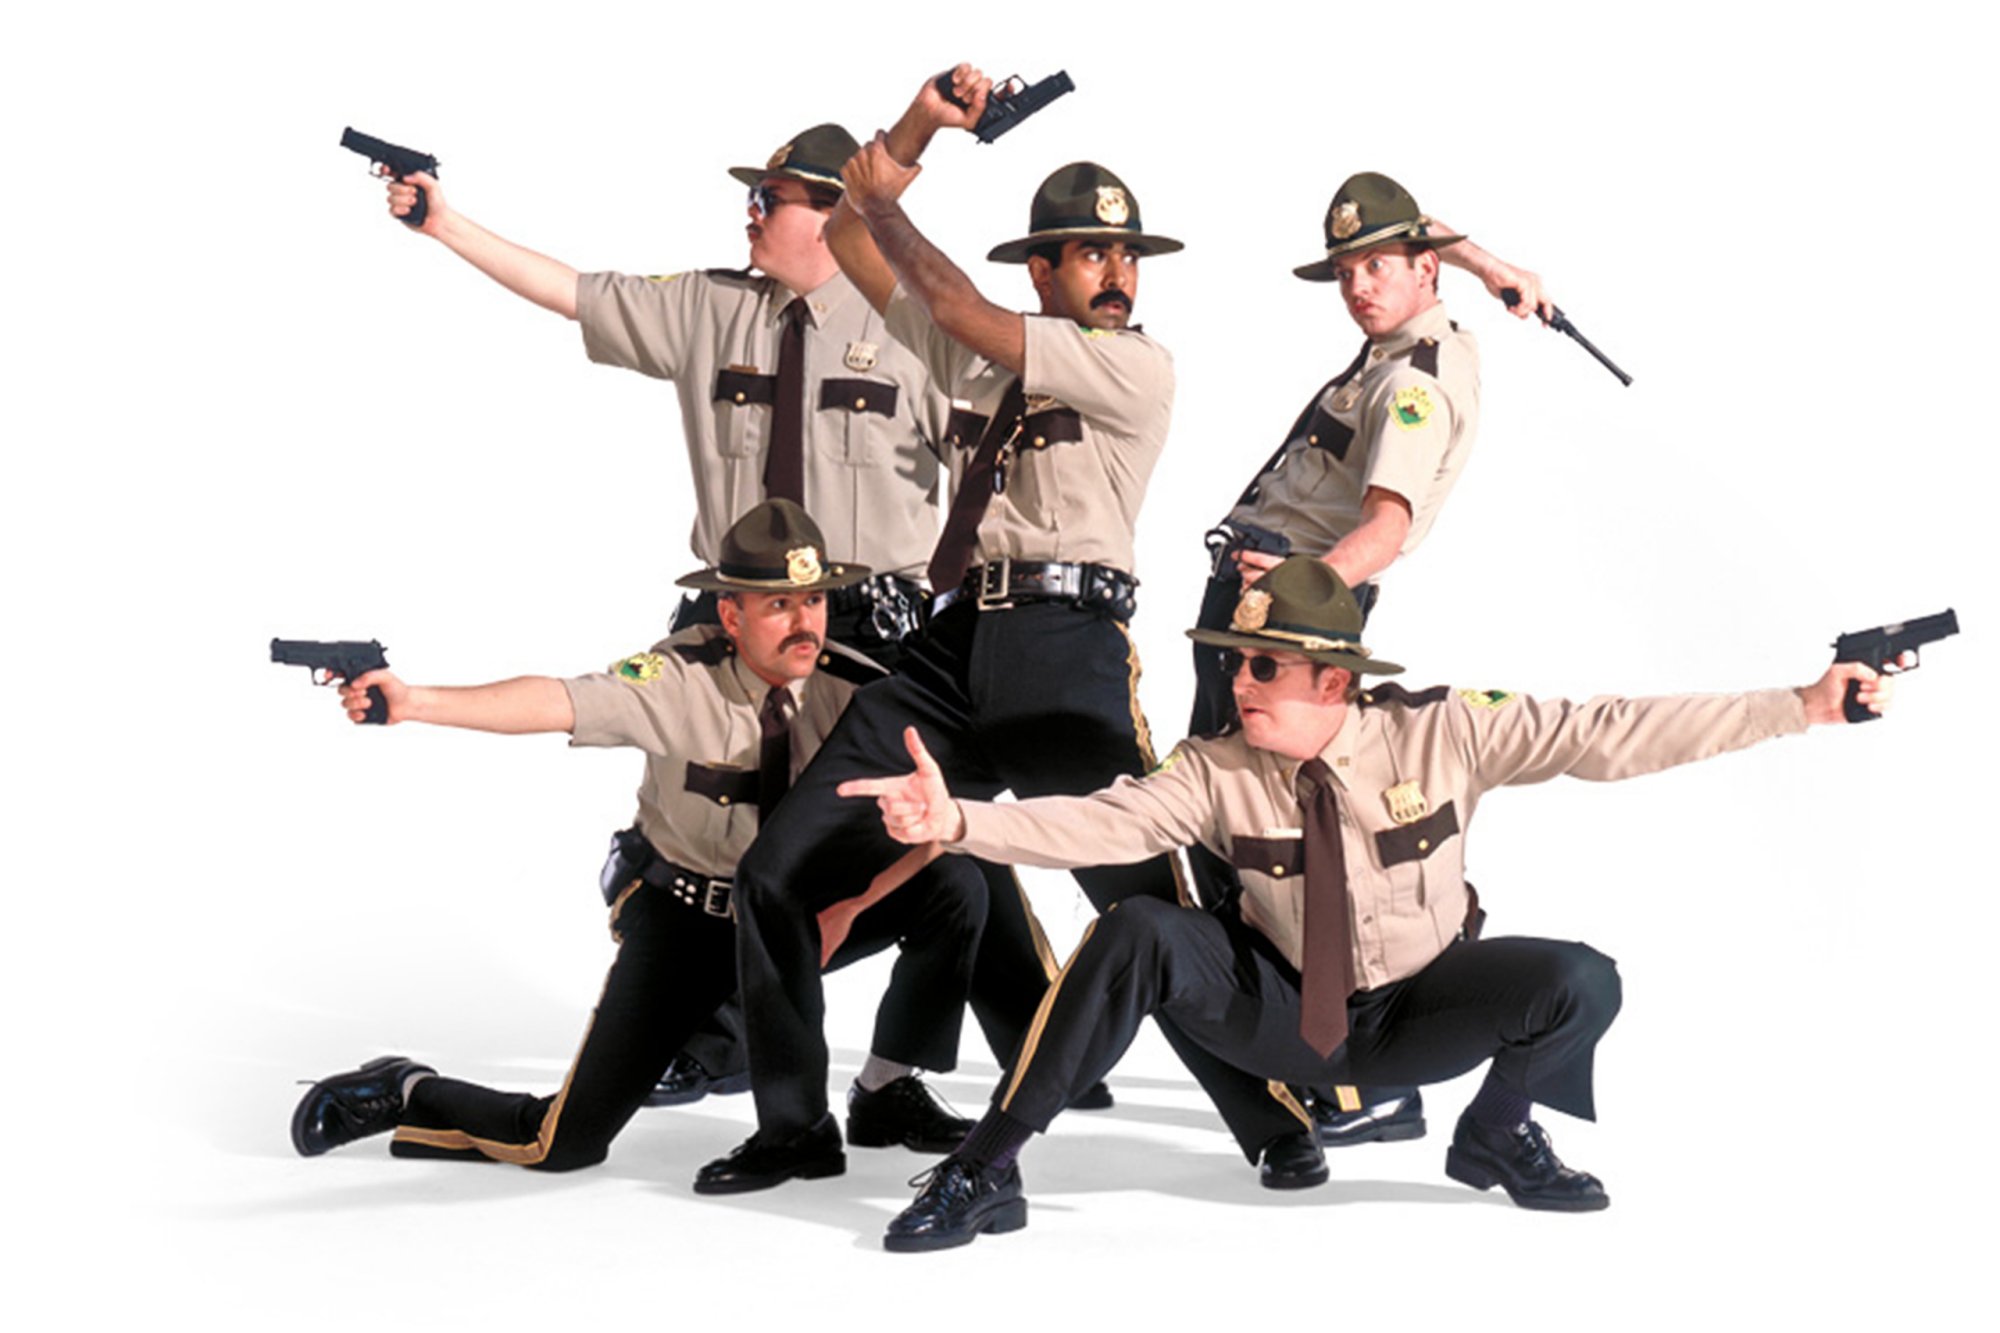 Super Troopers Backgrounds, Compatible - PC, Mobile, Gadgets| 2000x1333 px